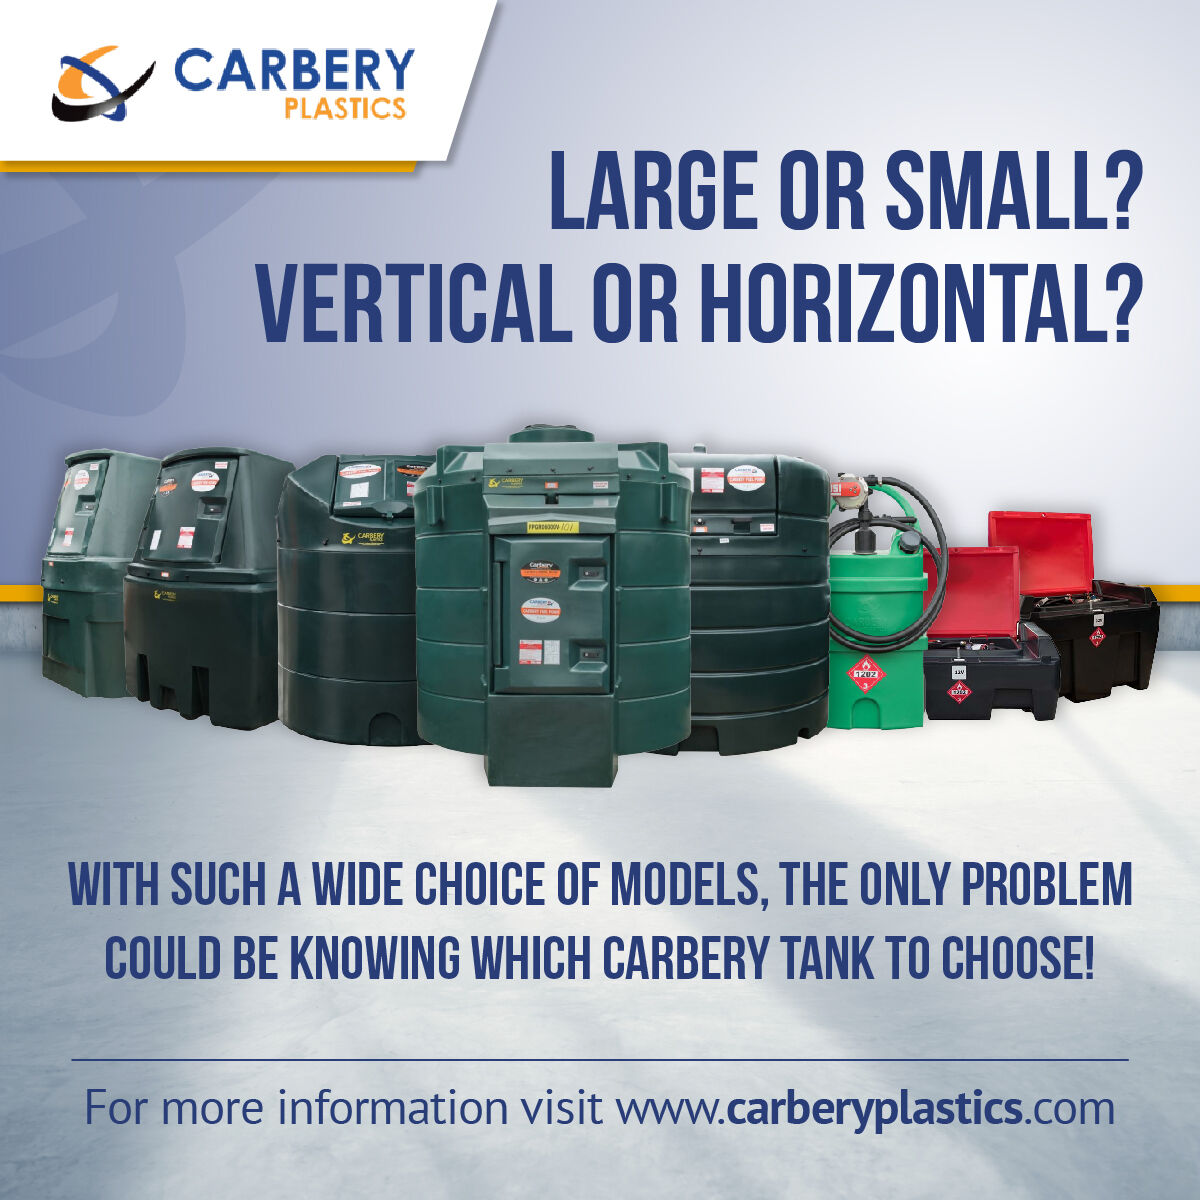 Carbery Plastic provide complete solutions for storage of diesel , AdBlue, Heating Oil and Waste Oil.

With such a wide choice of models, the only problem could be knowing which Carbery tank to choose! carberyplastics.com/carbery-produc…